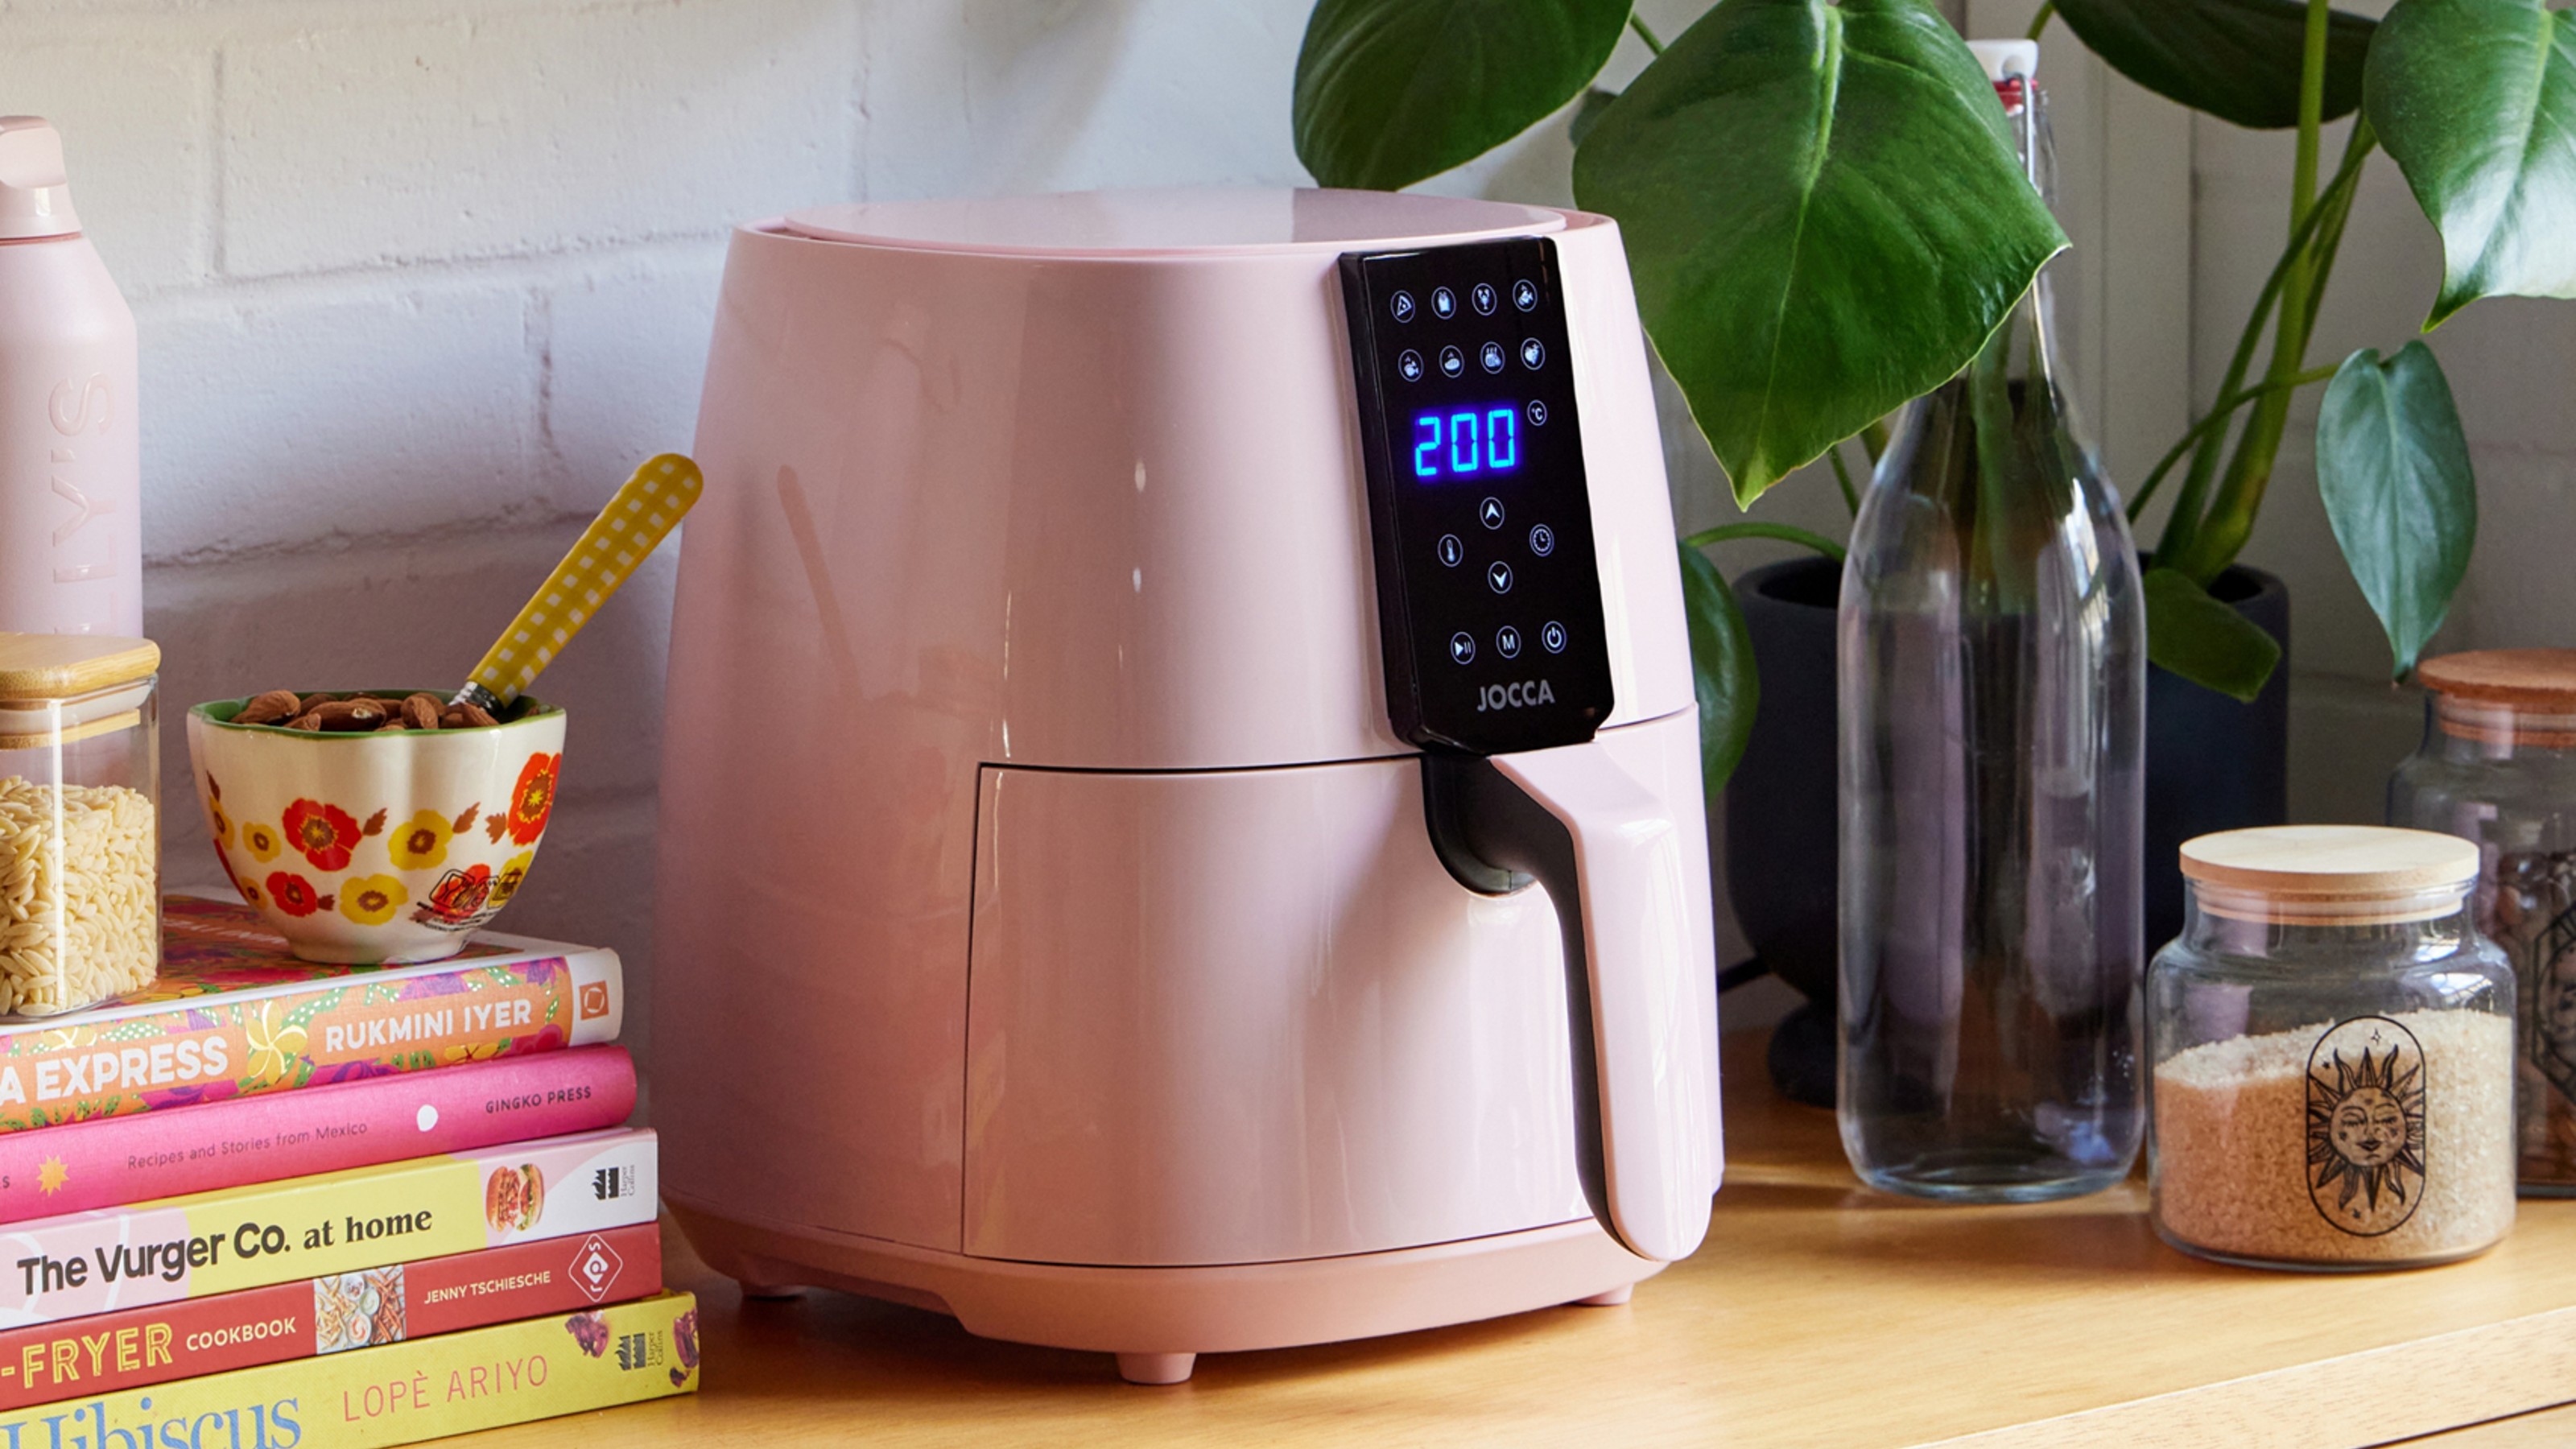 Urban Outfitters is selling the prettiest pink air fryer